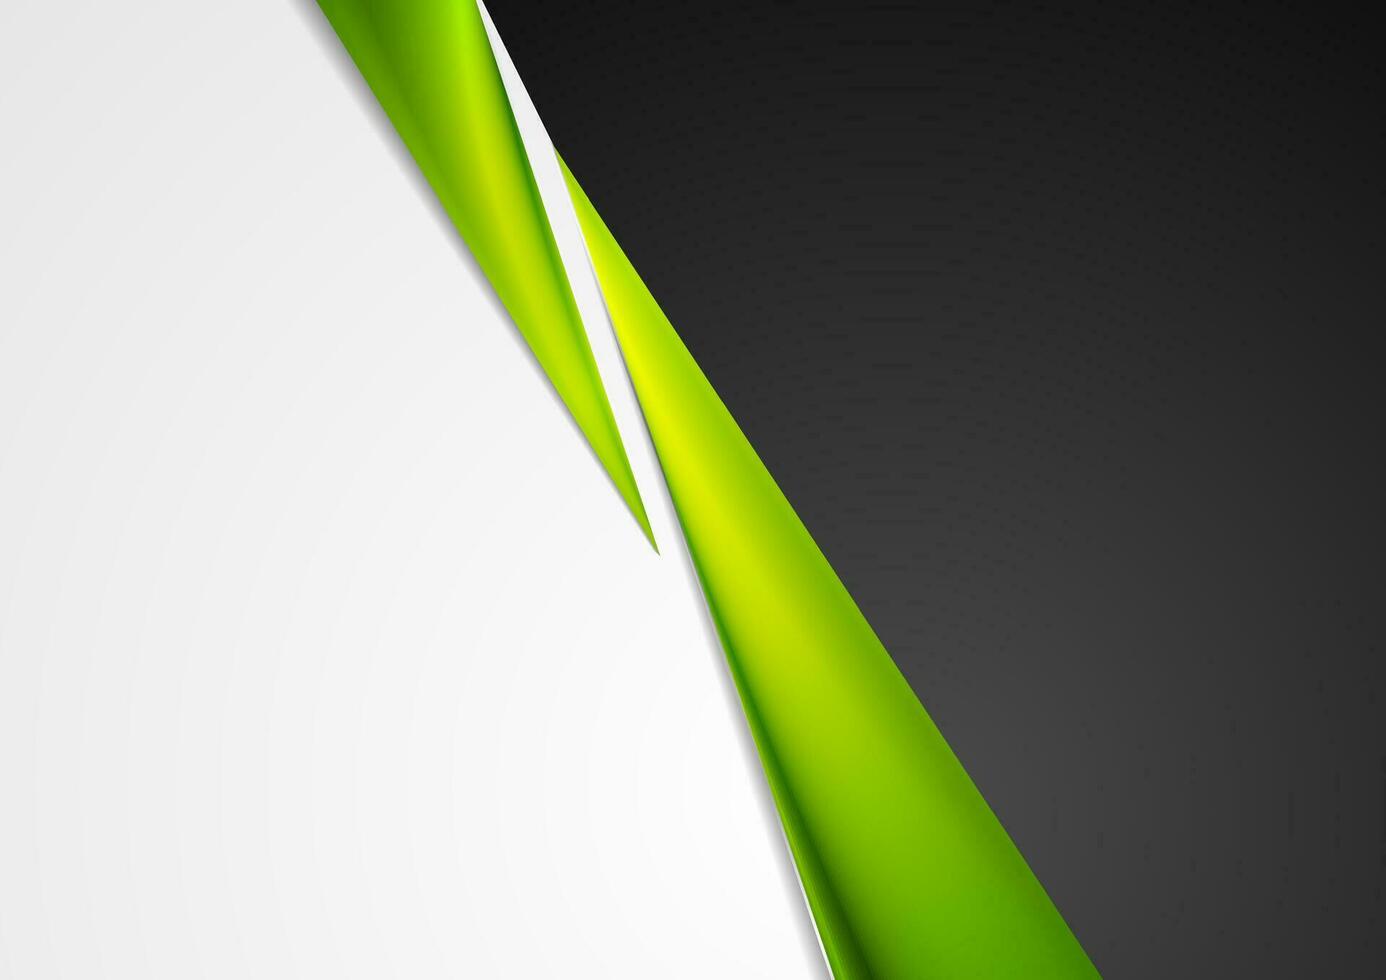 Grey, black and green abstract corporate background vector